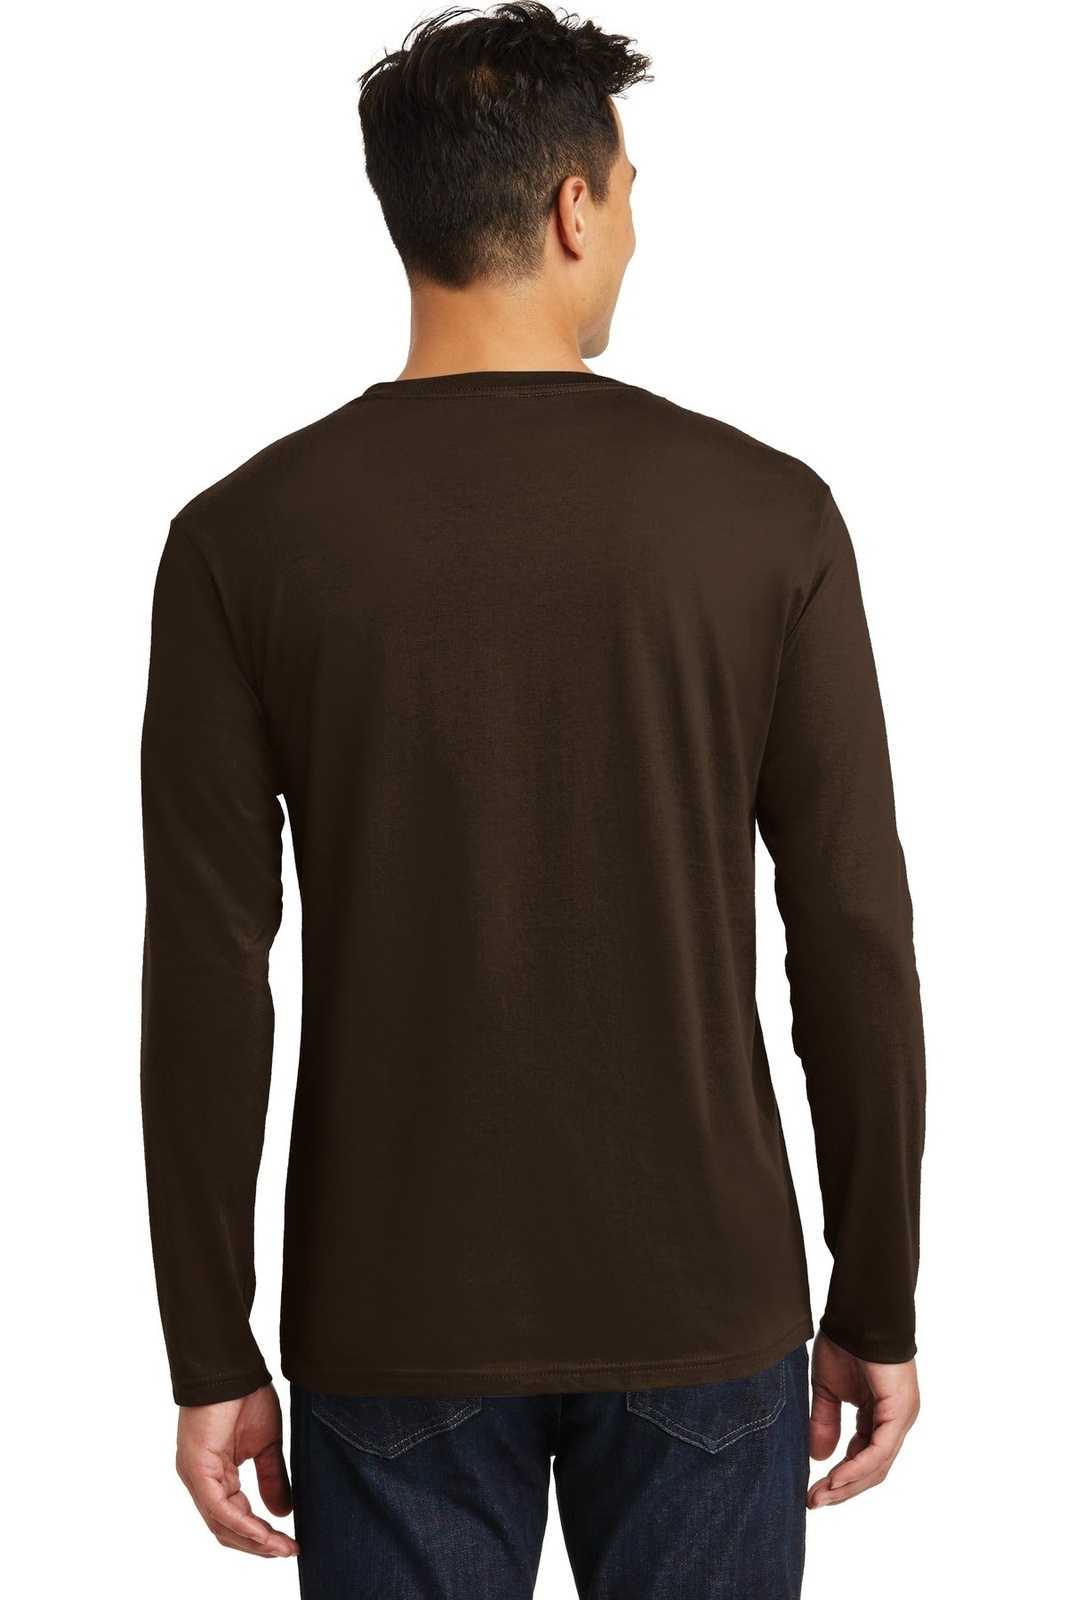 District DT105 Perfect Weight Long Sleeve Tee - Espresso - HIT a Double - 2